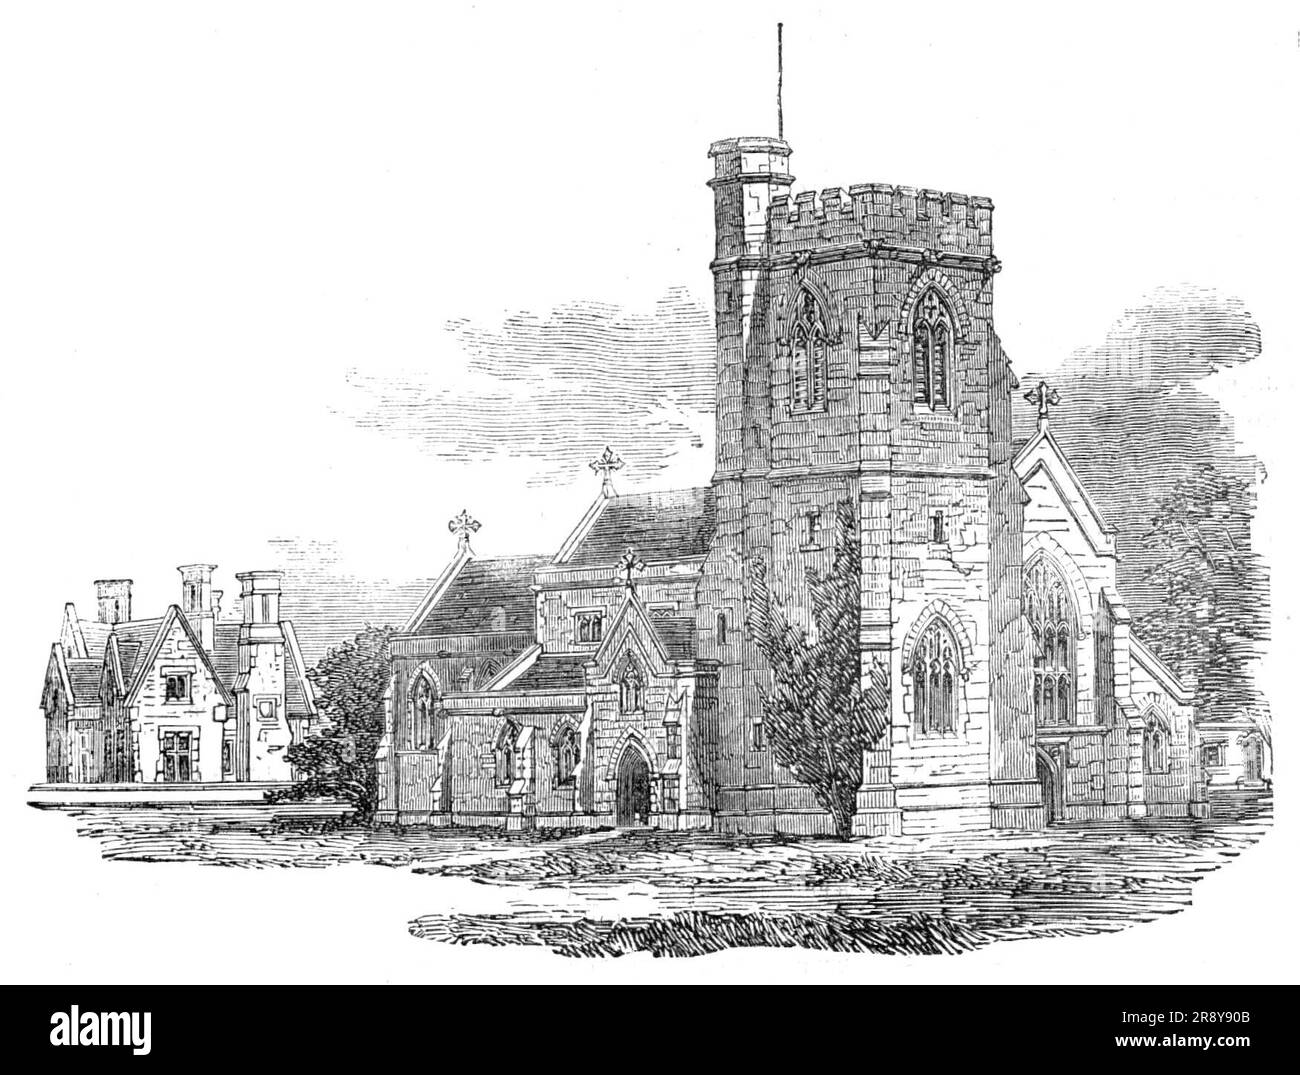 New Church of St. John the Baptist, Isleworth, 1857. 'The style of the church is Gothic, of the Perpendicular period...The architect was James Deason, Esq...The situation is within two or three hundred yards of the Isleworth station of the Windsor Railway; the edifice from it appears to great advantage...To the left of the church in the engraving is the Parsonage House, completed within the last fortnight. It has been built in strict accordance with the character of the church, at the sole cost of John Farnell, Esq., of Isleworth. On the right of the view is shown a portion of a cluster of twe Stock Photo